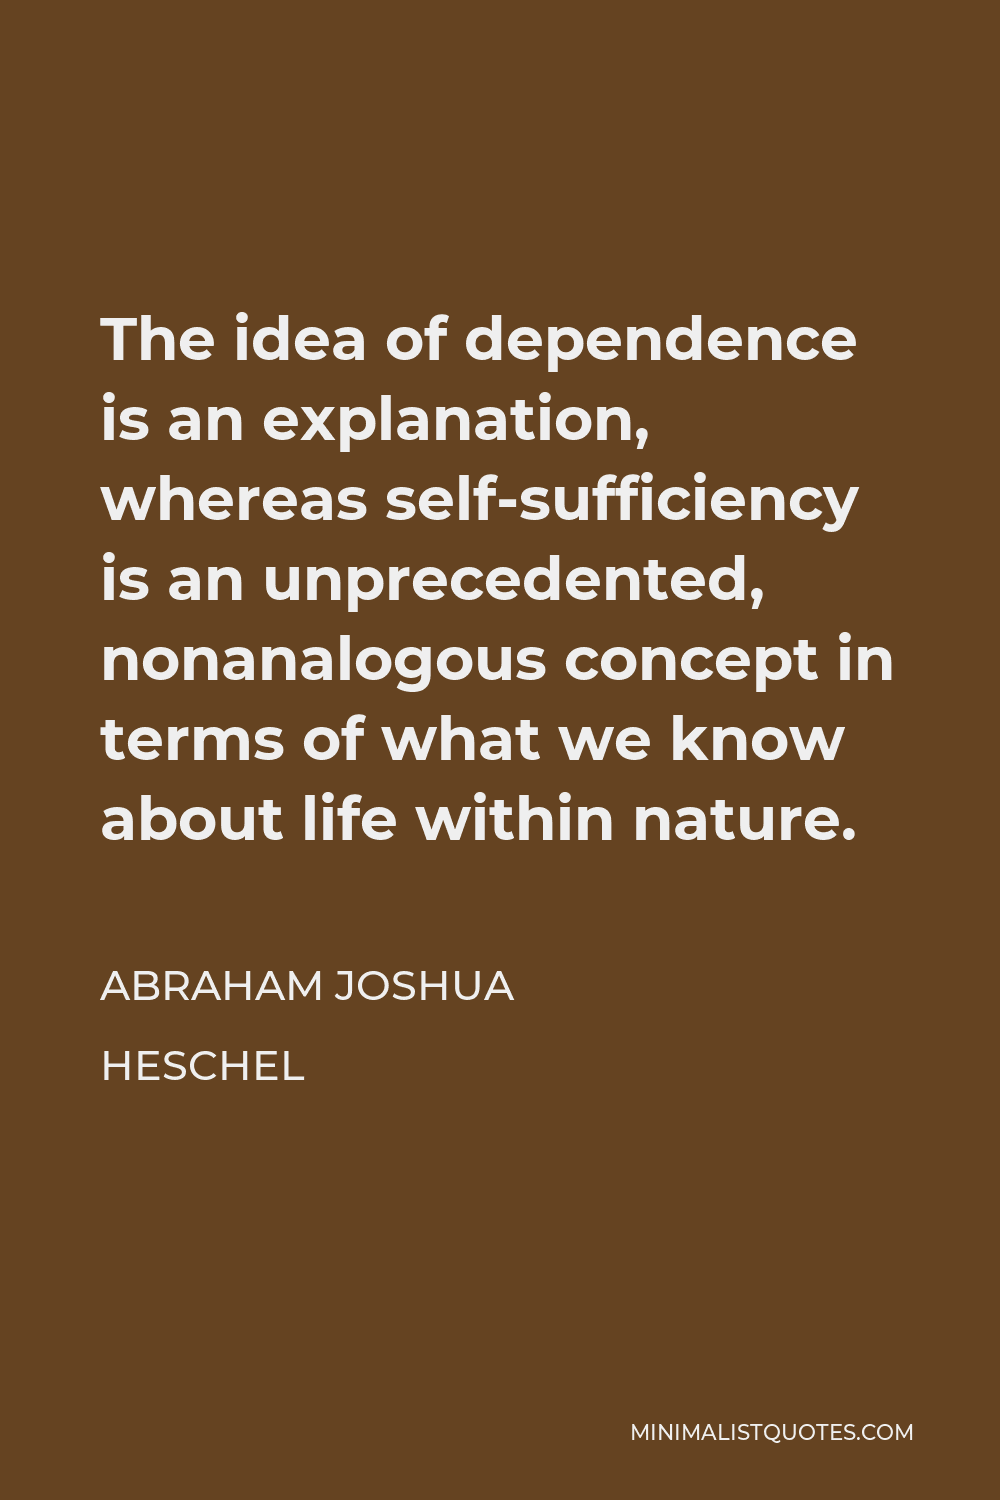 Abraham Joshua Heschel Quote - The idea of dependence is an explanation, whereas self-sufficiency is an unprecedented, nonanalogous concept in terms of what we know about life within nature.